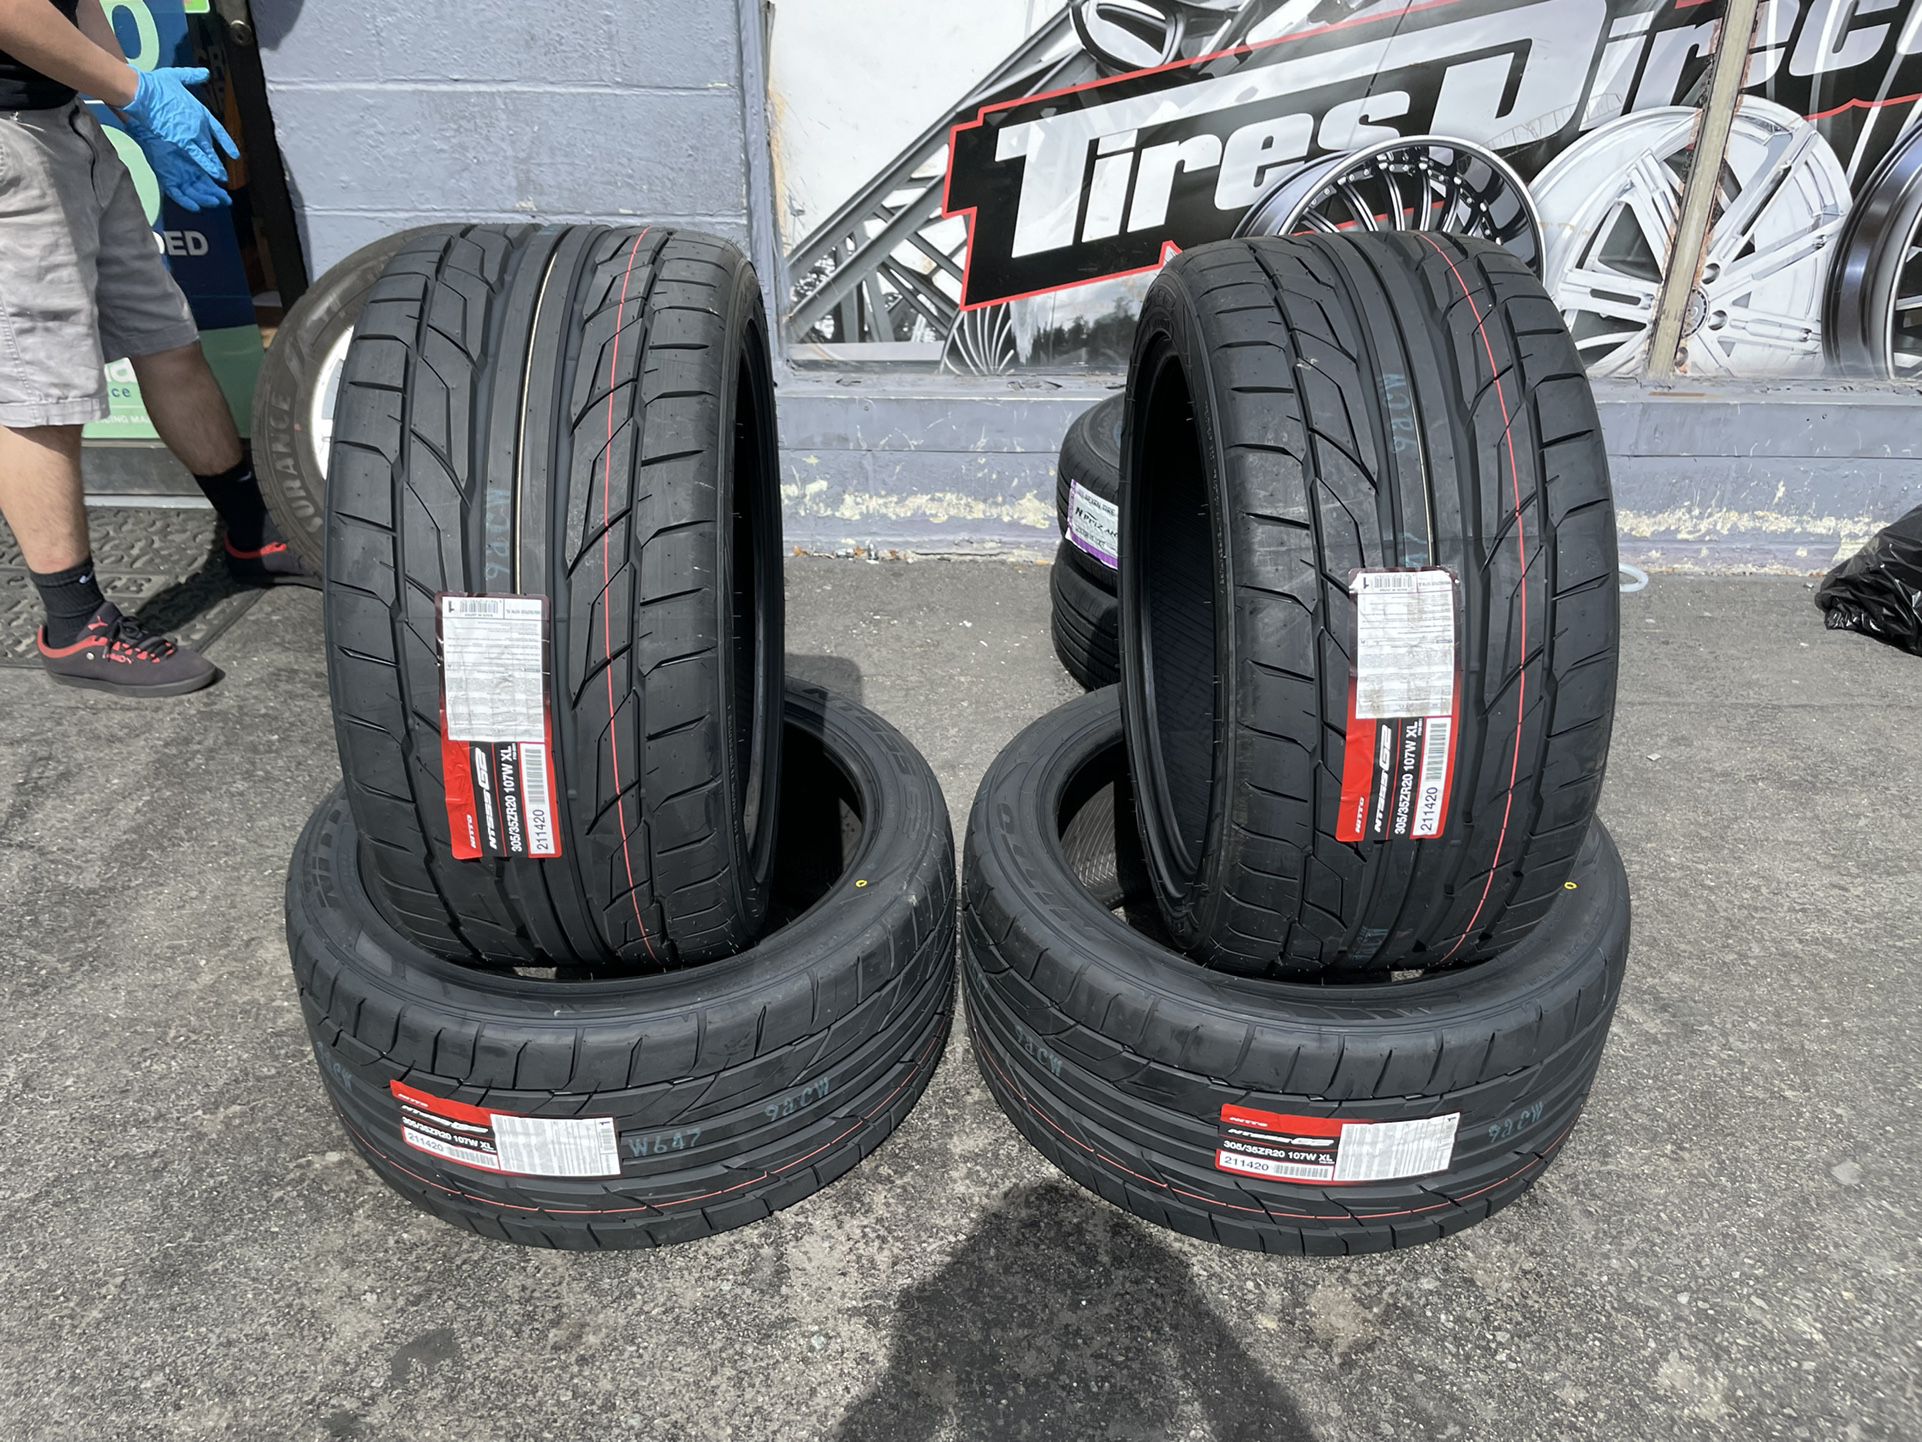 305-35-20 Nitto Nt555g2 On Sale 